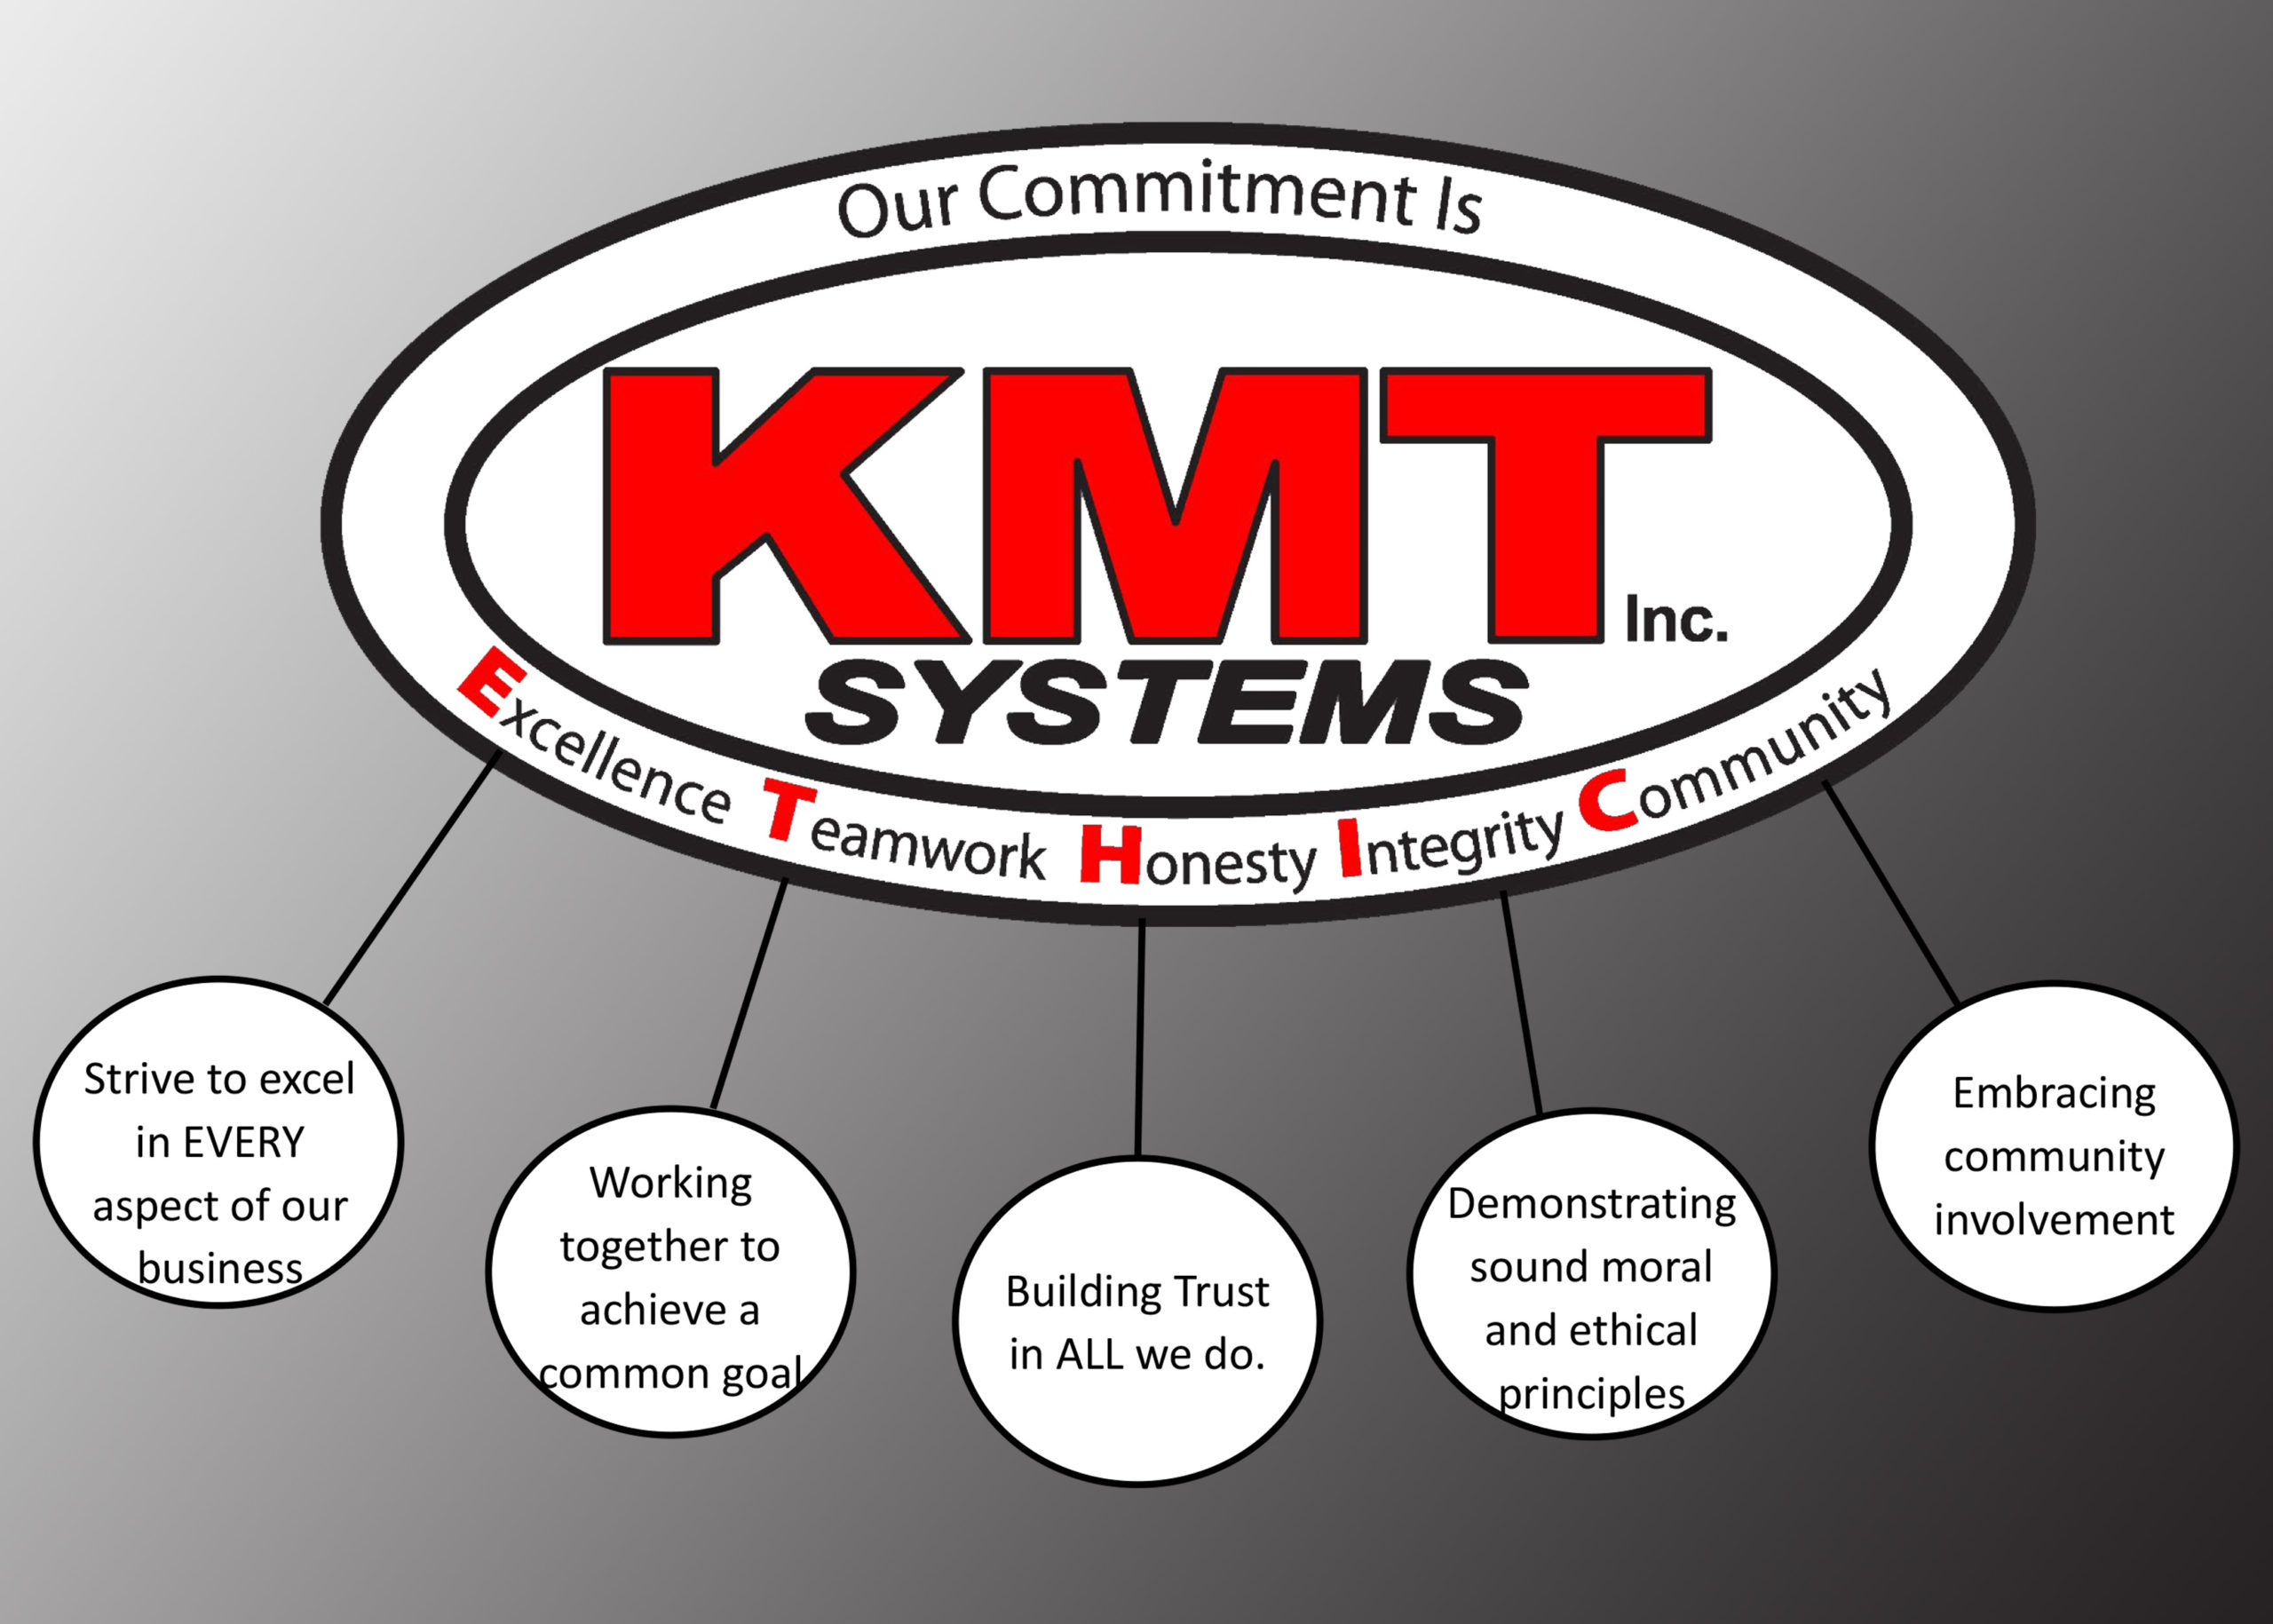 About | KMT SYSTEMS